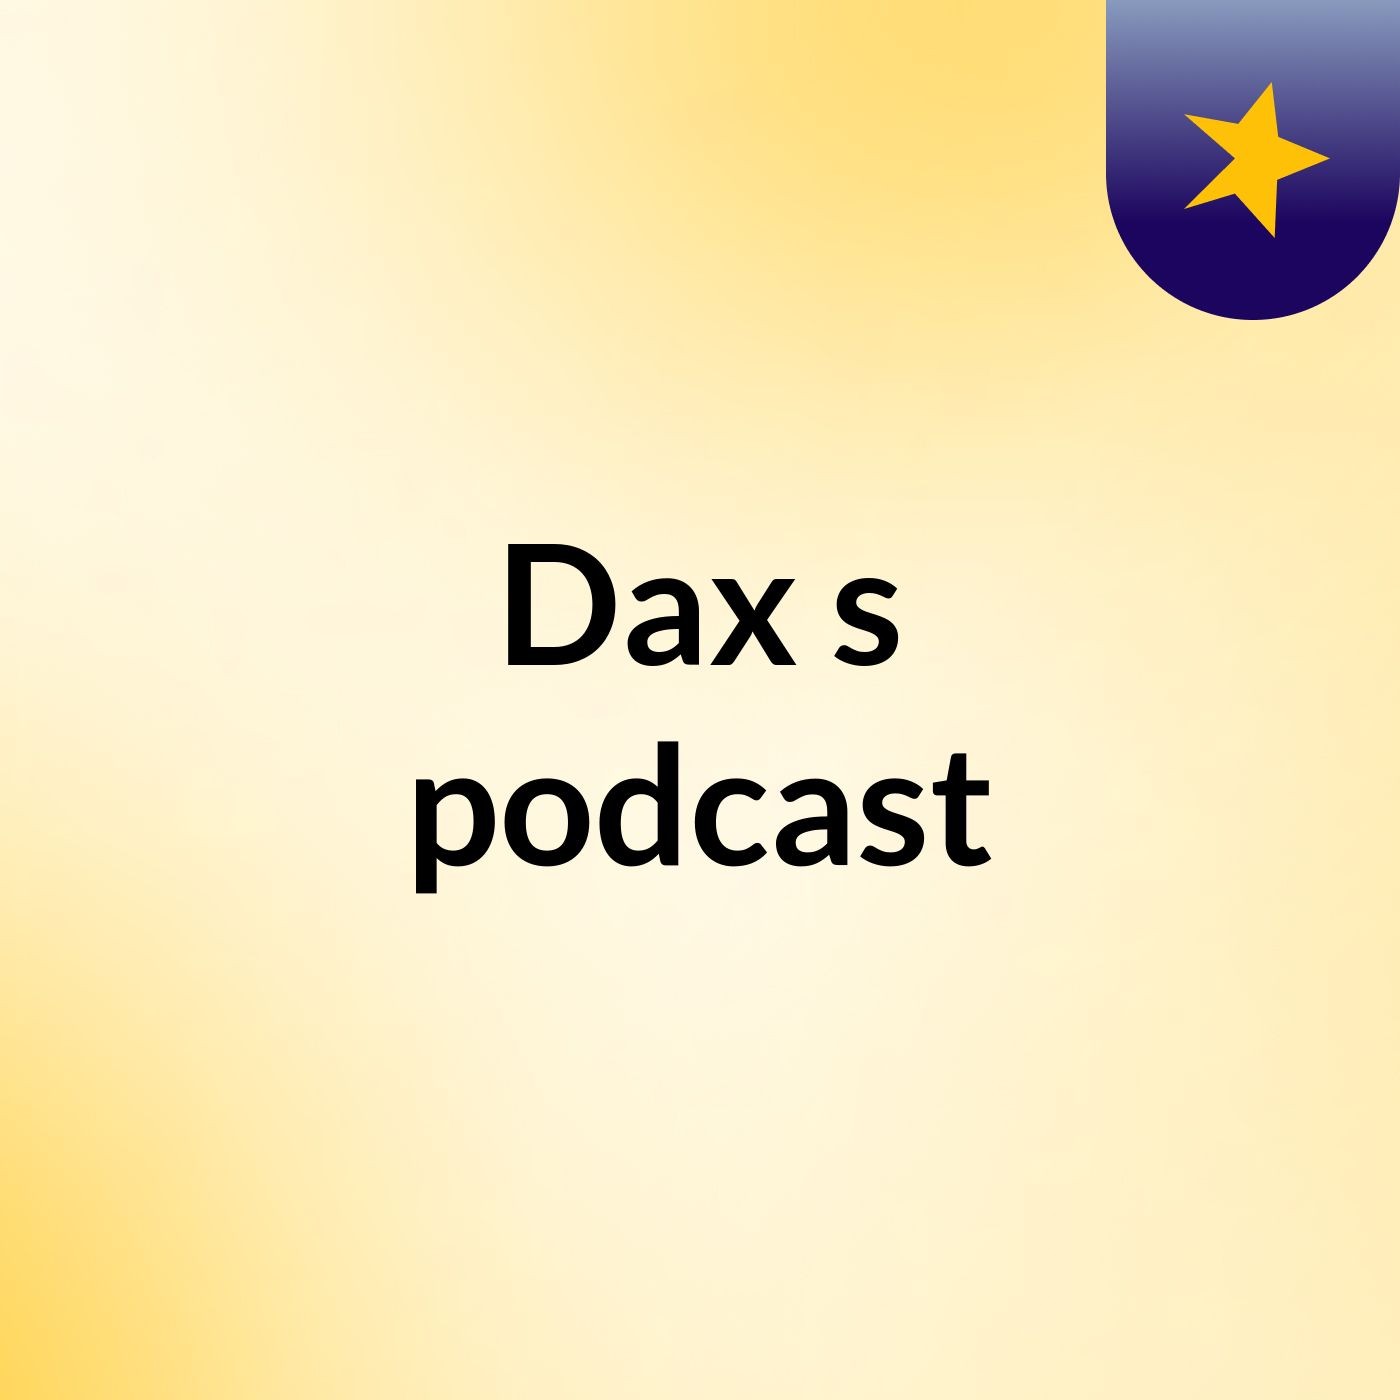 Dax's podcast